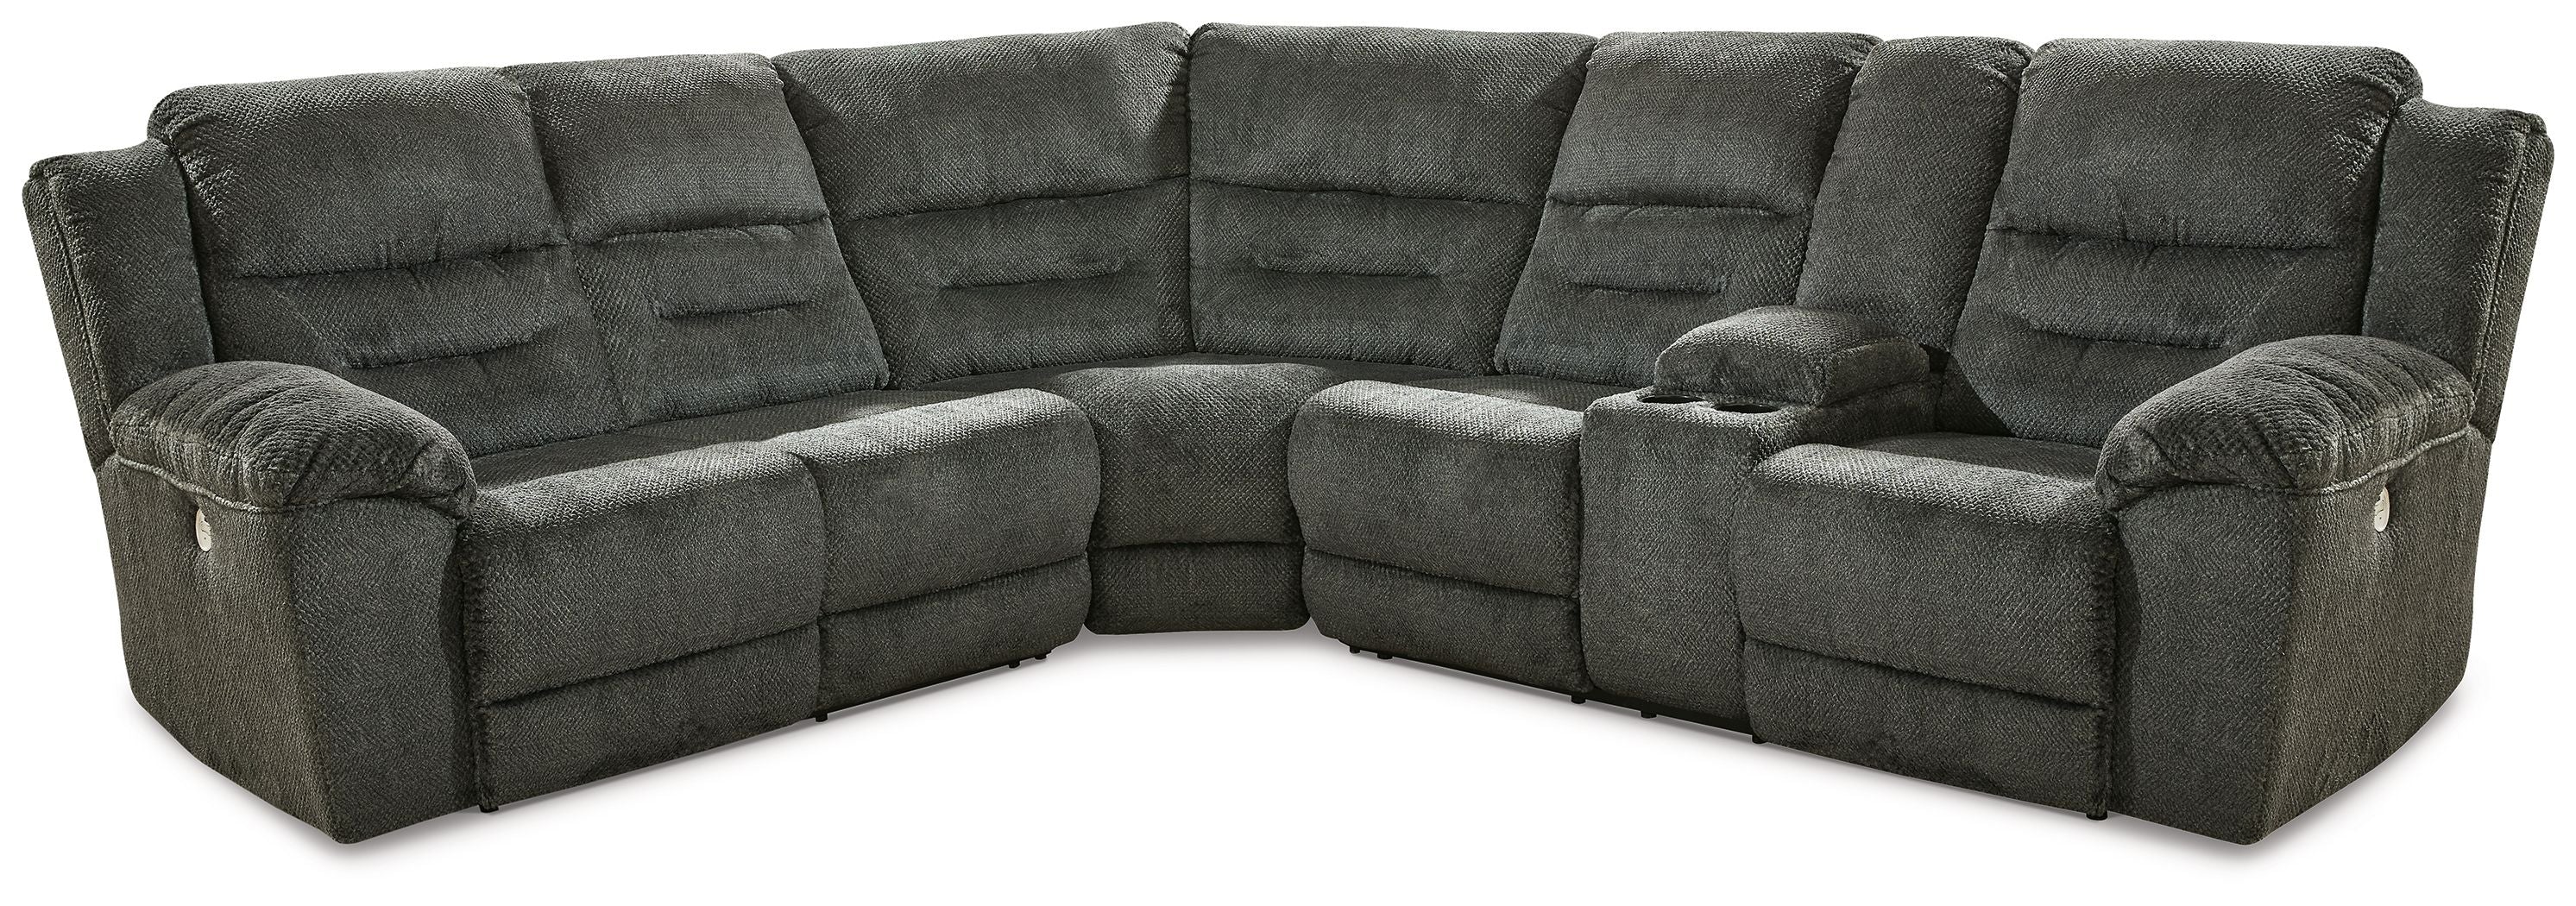 Nettington - Power Reclining Sectional-Reclining Sectionals-American Furniture Outlet